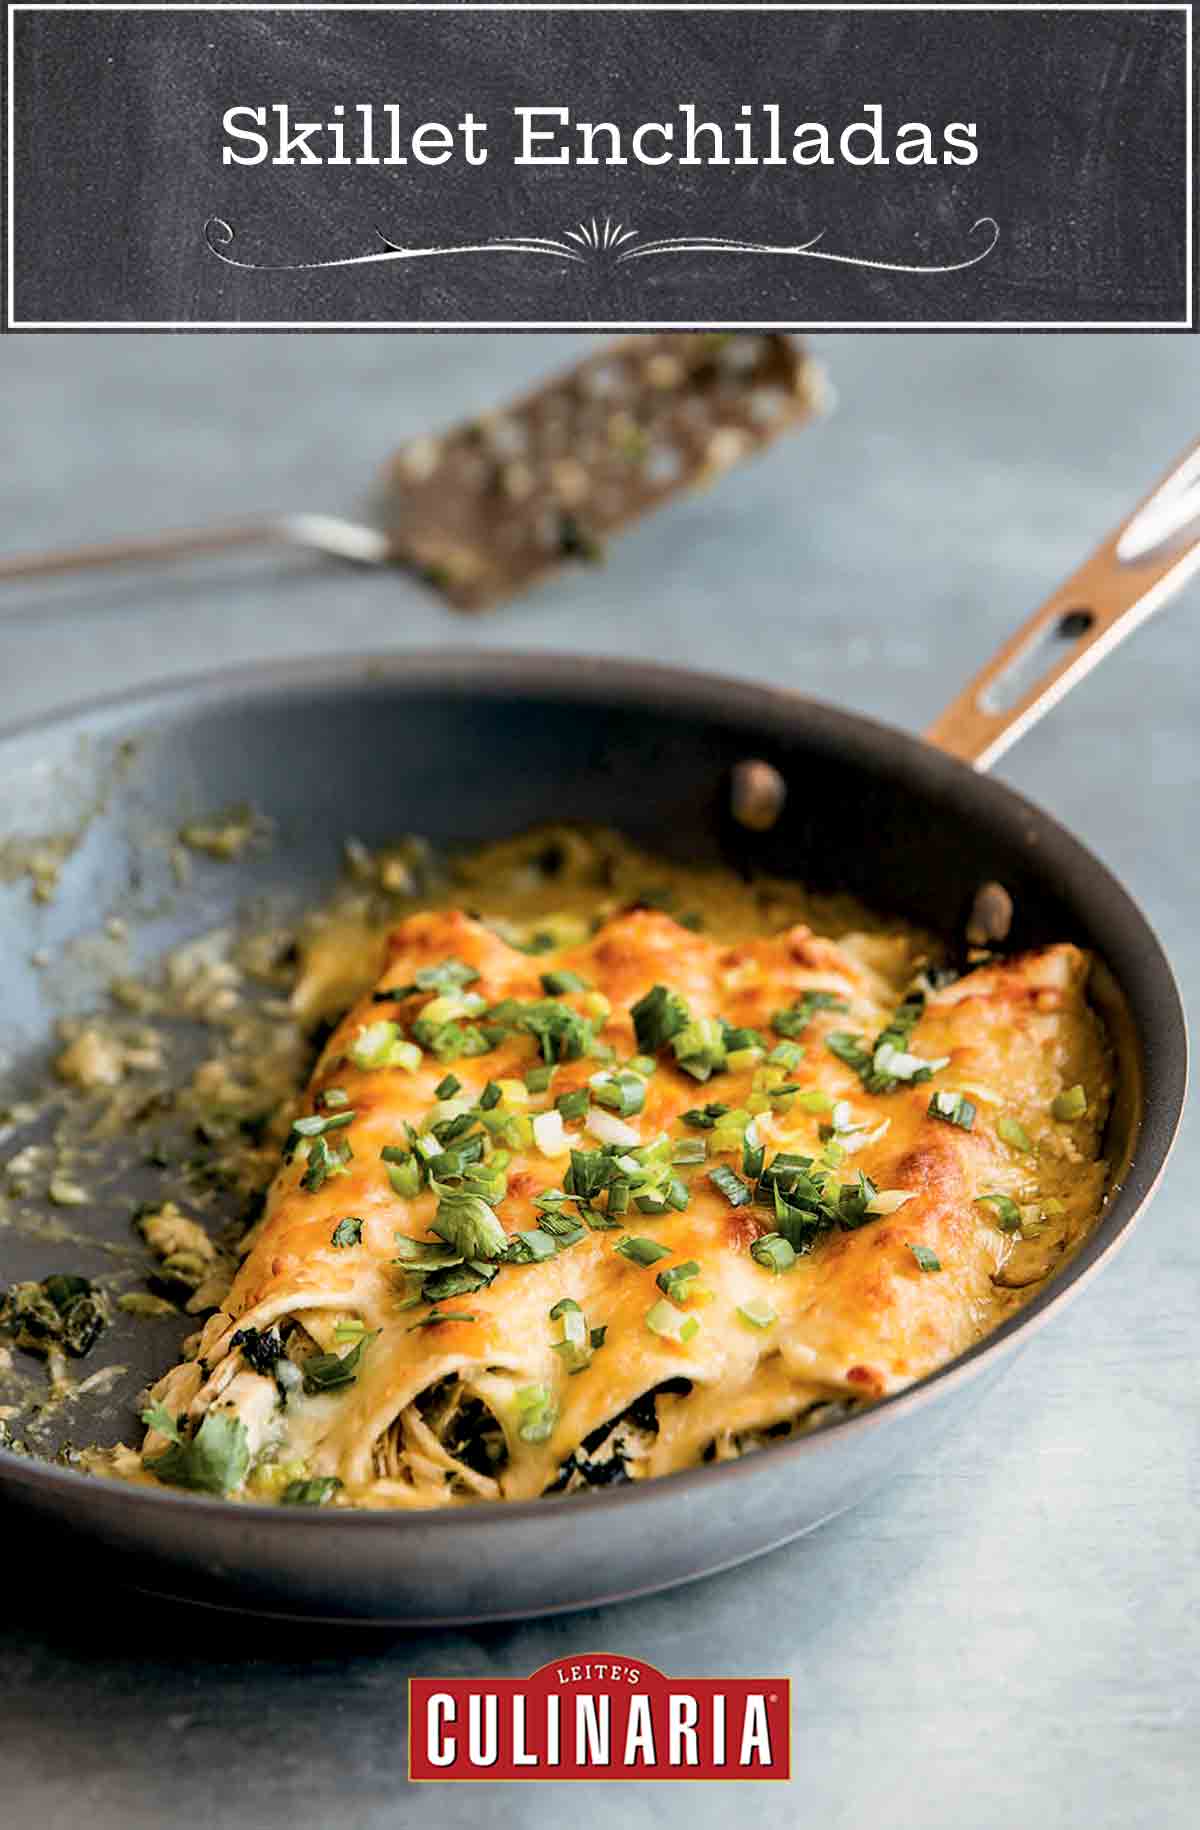 Four chicken enchiladas in a nonstick skillet, topped with scallions.